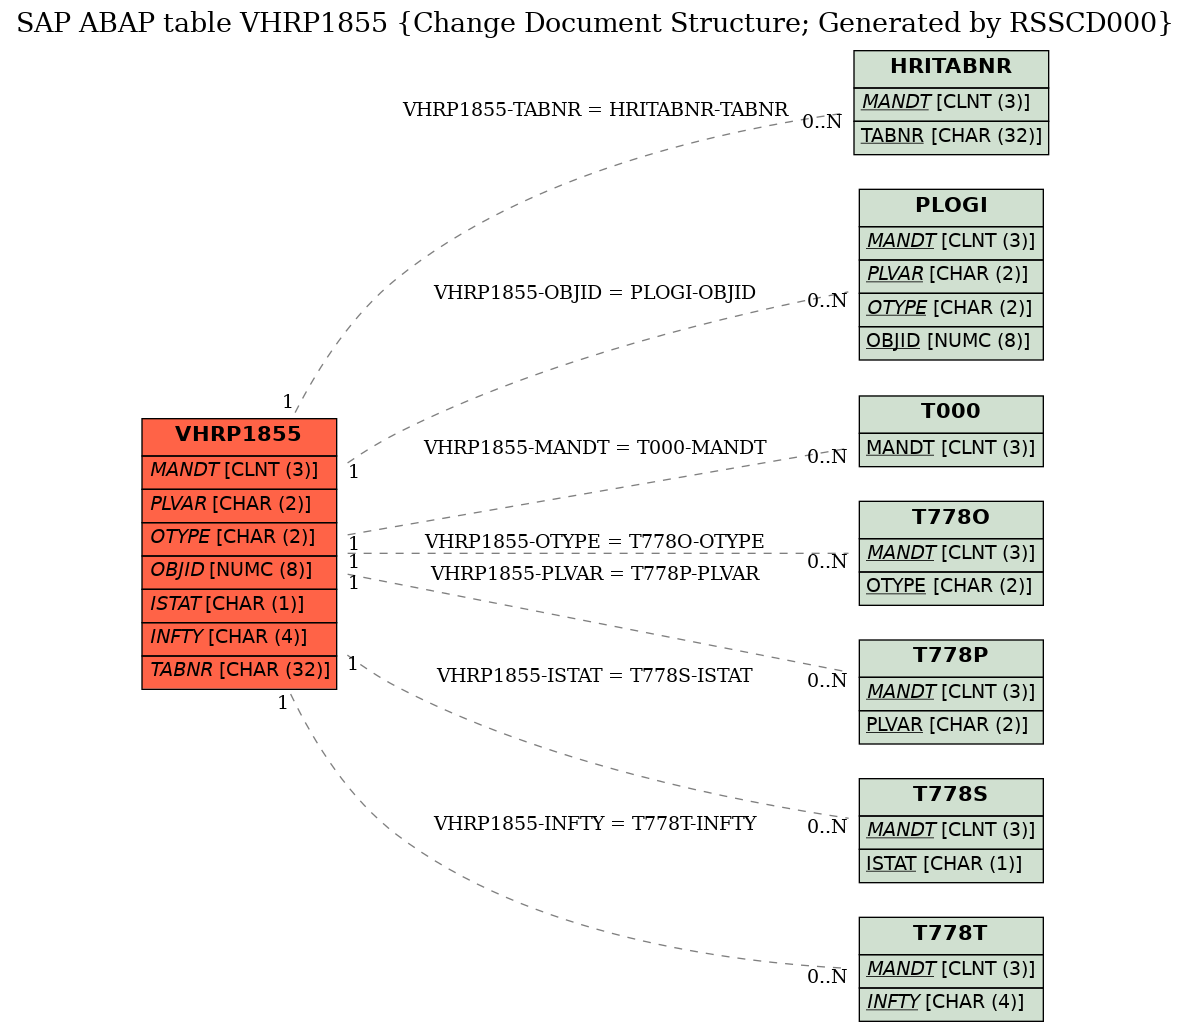 E-R Diagram for table VHRP1855 (Change Document Structure; Generated by RSSCD000)